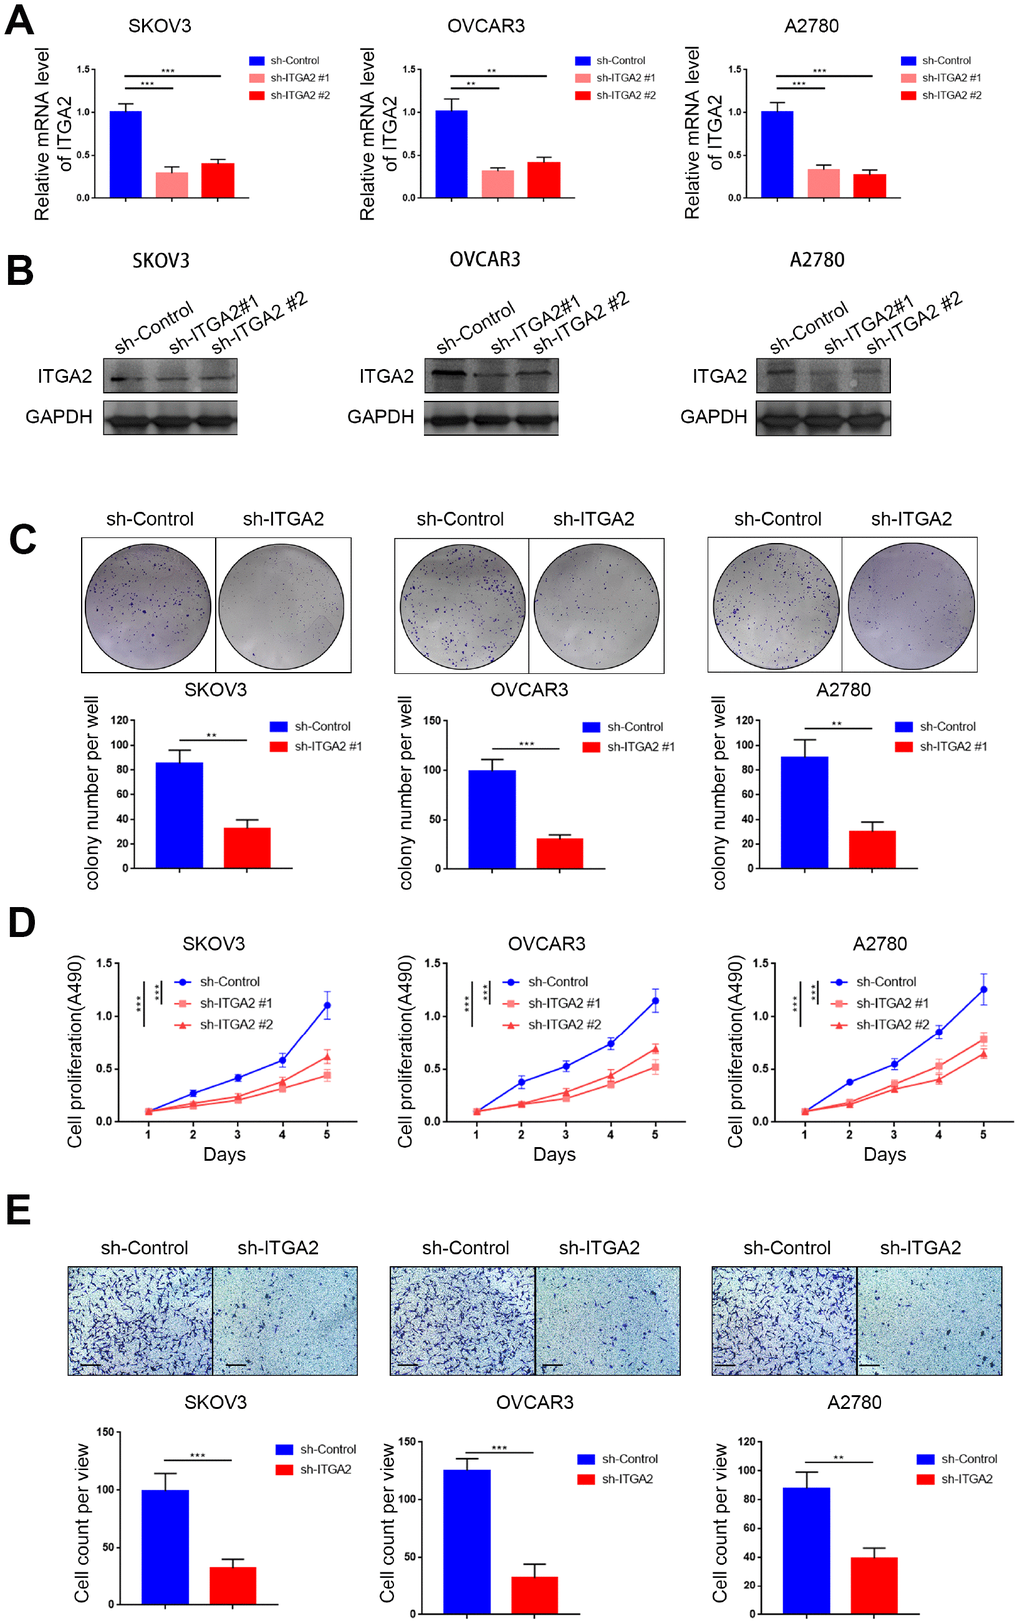 Silencing ITGA2 inhibited the aggressiveness of ovarian cancer in vitro. (A). SKOV3, OVCAR3, and A2780 cells lines with ITGA2 knockdown were established. RT-PCR assay (A) and Western blot assay (B) were performed in the three cell lines. GAPDH served as an internal reference. Data presented as the mean ± SD of three independent experiments. Each sh-ITGA2 group was compared with sh-Control group. Statistical analyses were performed with one-way ANOVA followed by Tukey's multiple comparison's tests. **, P C), MTS assay (D), and migration assay (E). For e, representative images of migrated cells were shown based on a transwell assay. Each bar represents the mean ± SD of three to five independent experiments. Each sh-ITGA2 group was compared with sh-Control group. Statistical analyses were performed with one-way ANOVA followed by Tukey's multiple comparison's tests. **, P 